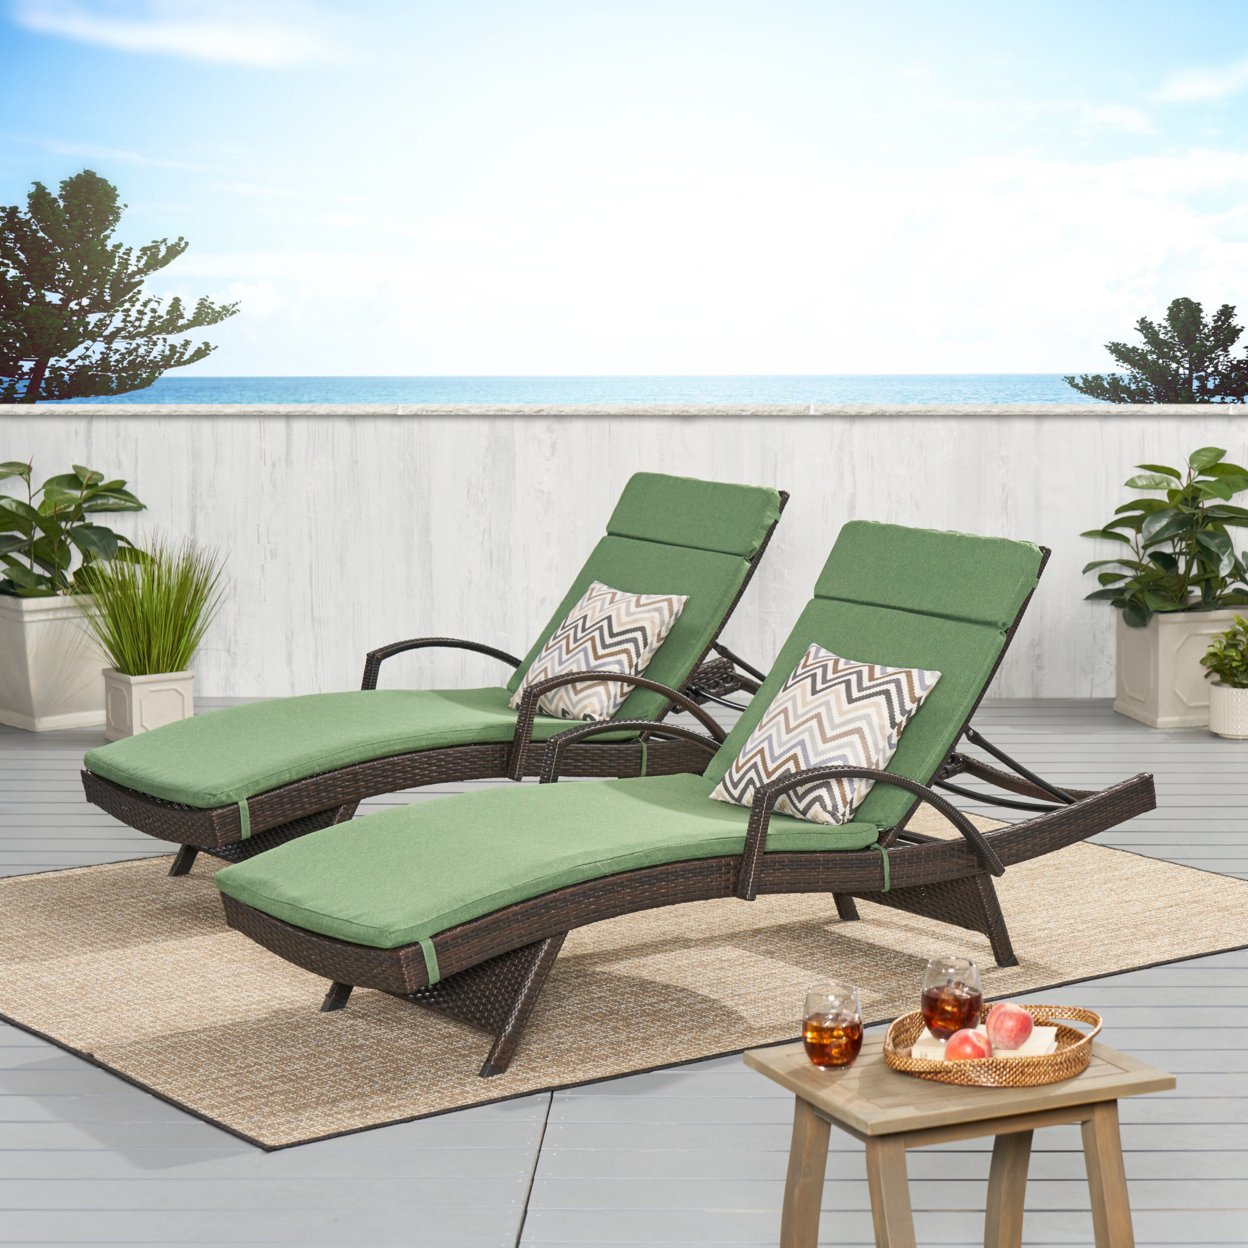 Lakeport Outdoor Wicker Armed Chaise Lounge Chairs With Cushions (set Of 2) - Jungle Green Cushion